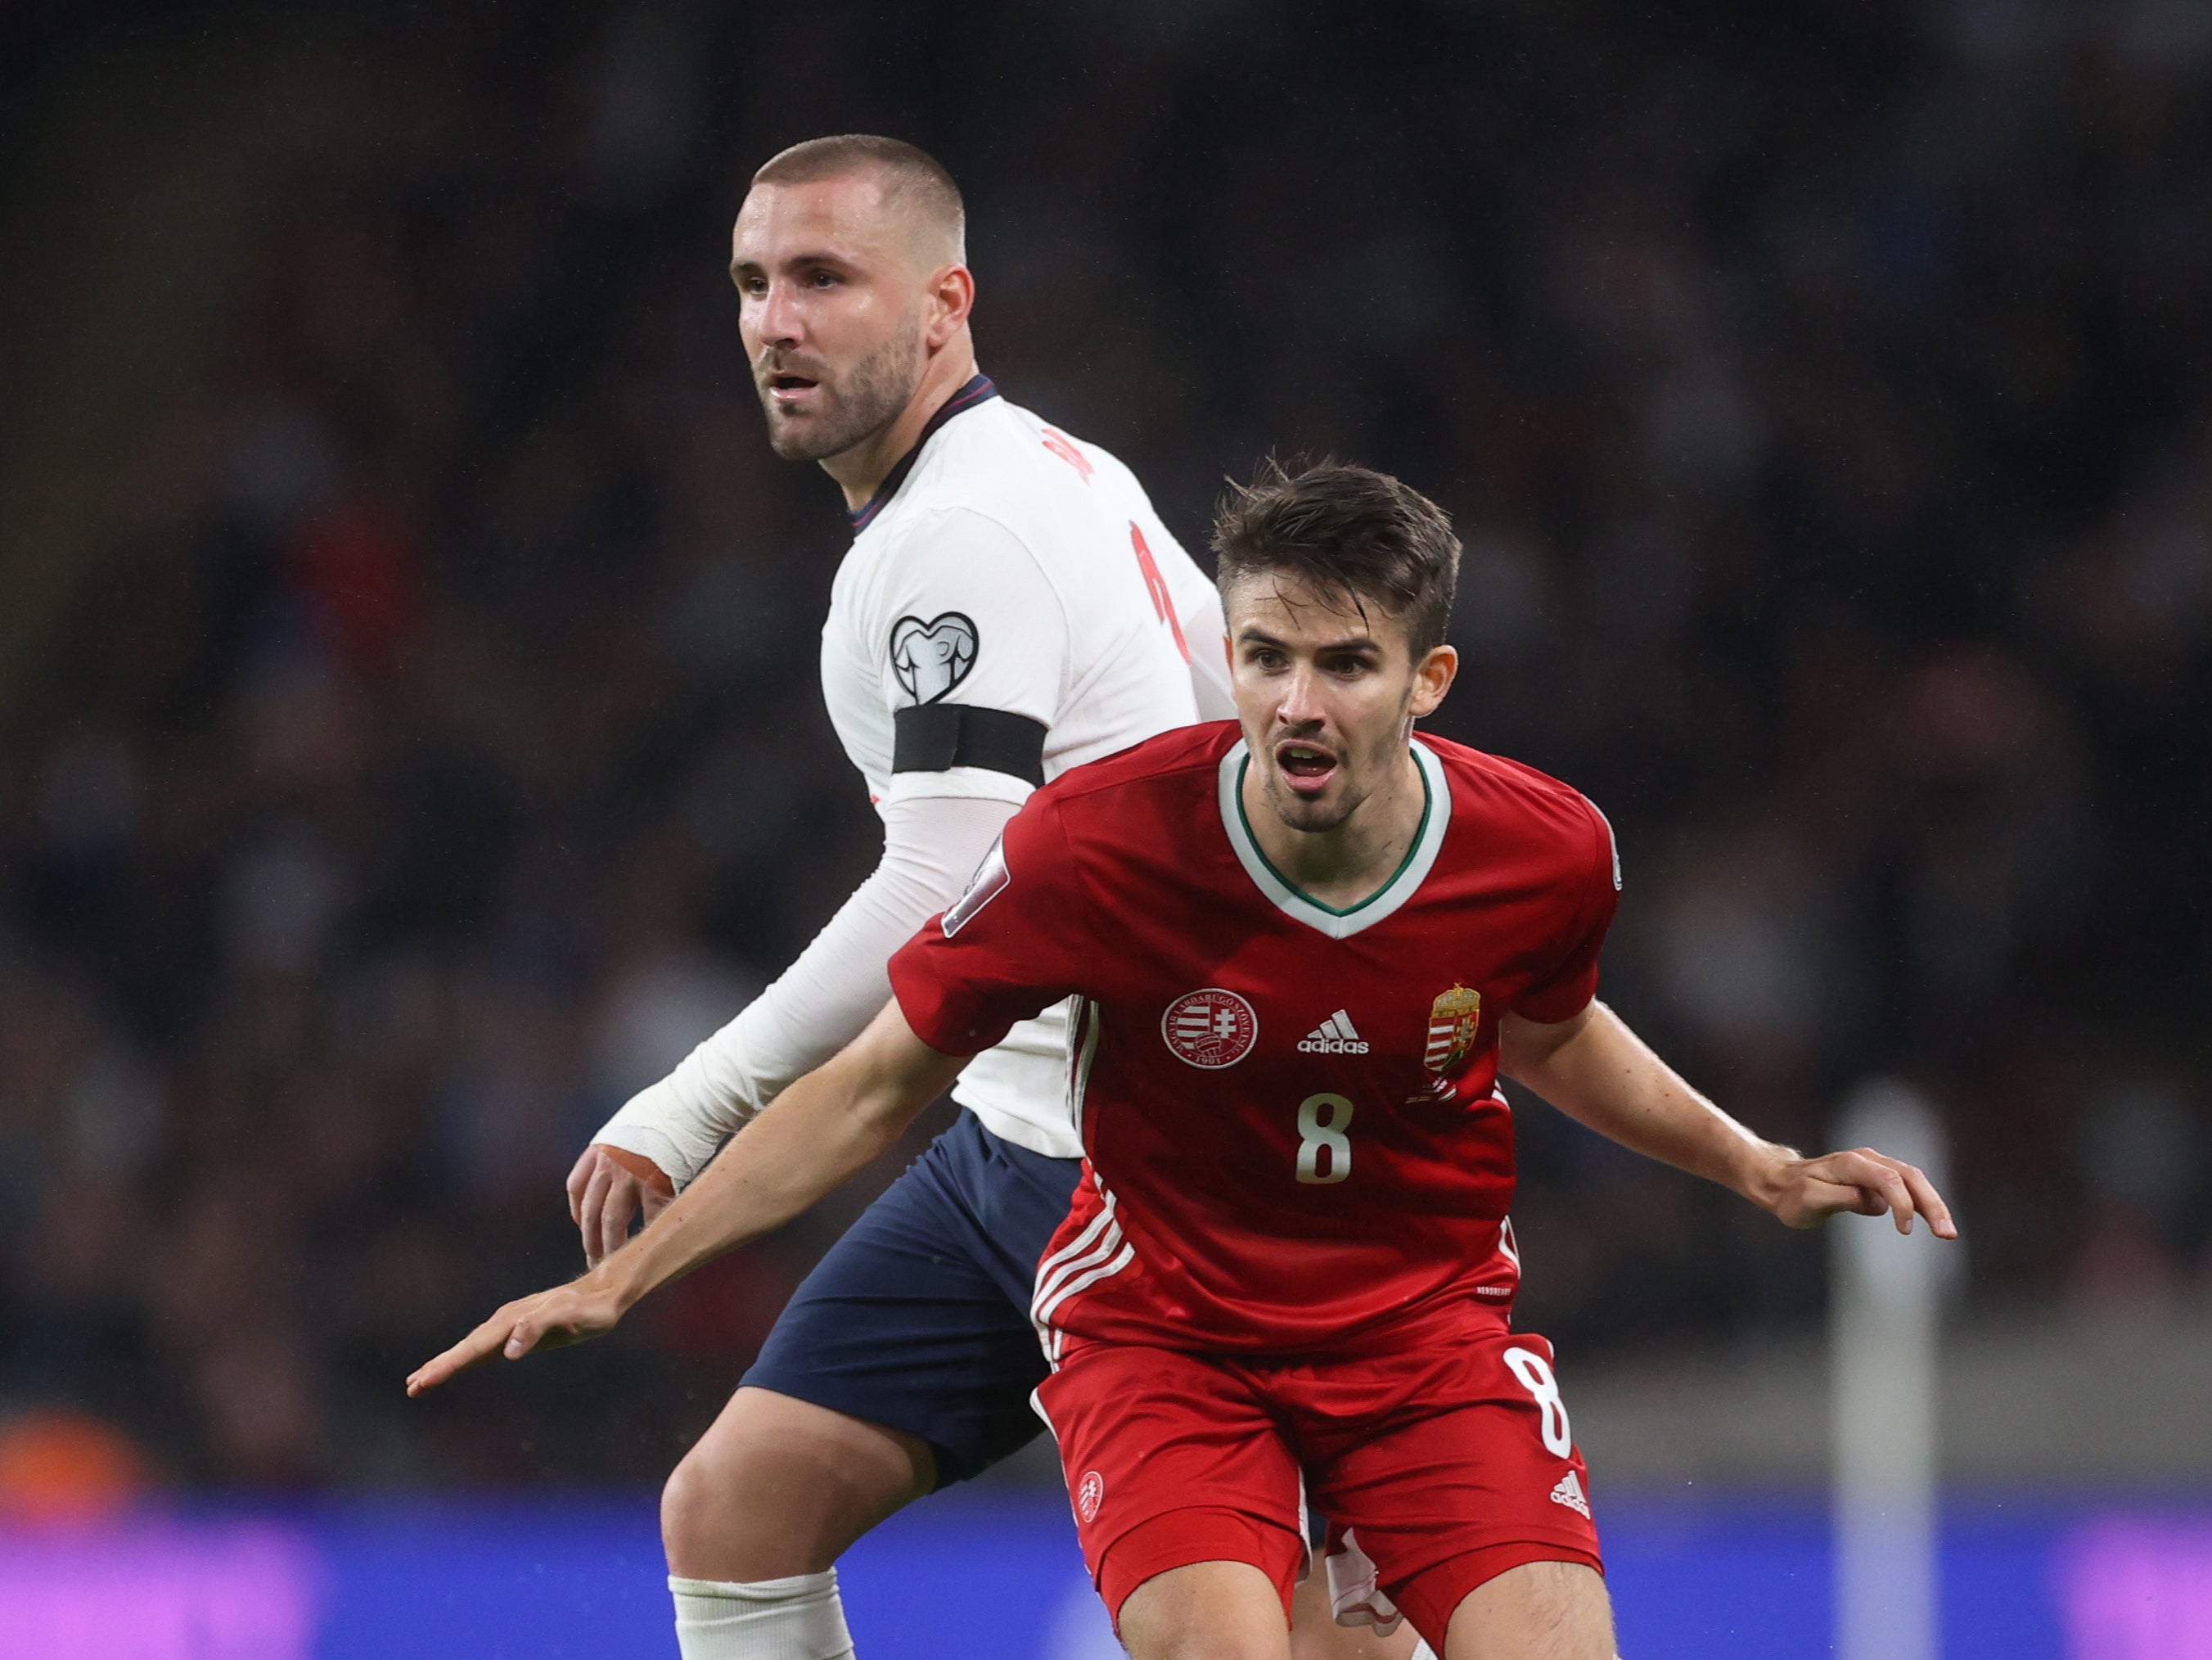 Luke Shaw will be relied upon at left-back for England